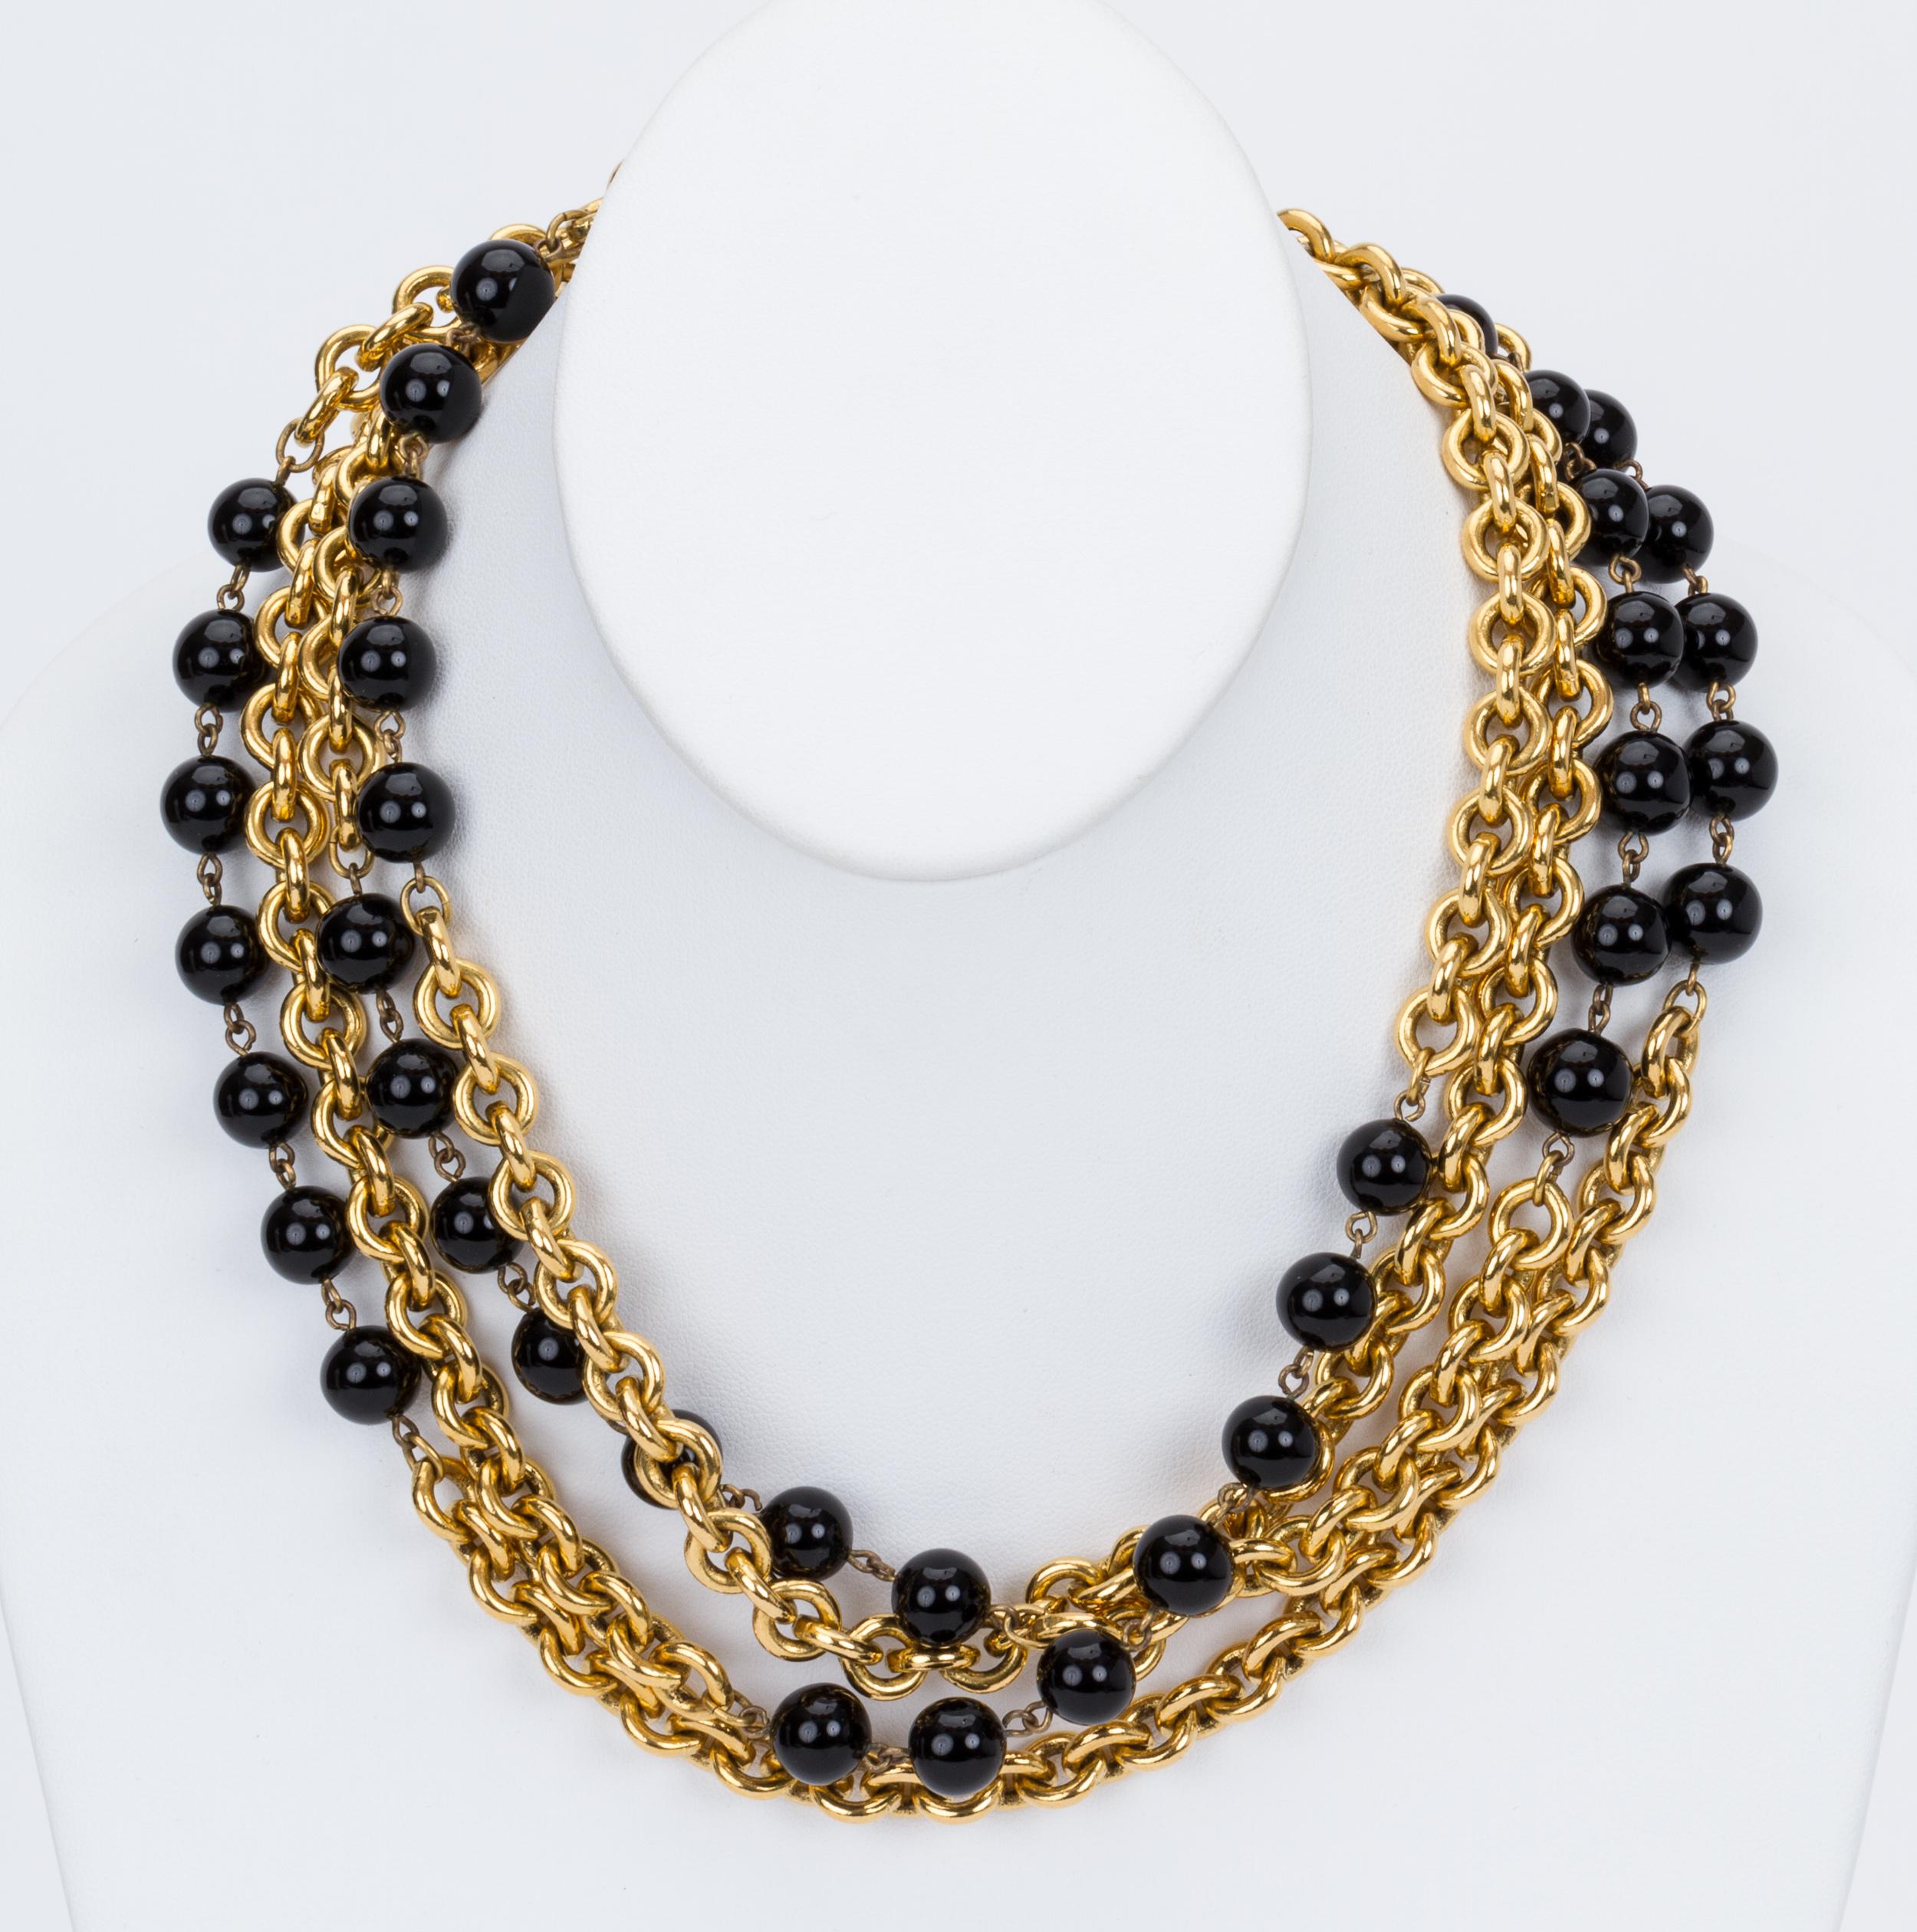 Chanel timeless black and gold double long necklace. Can be worn single or double. Collection 1984. Comes with original box.